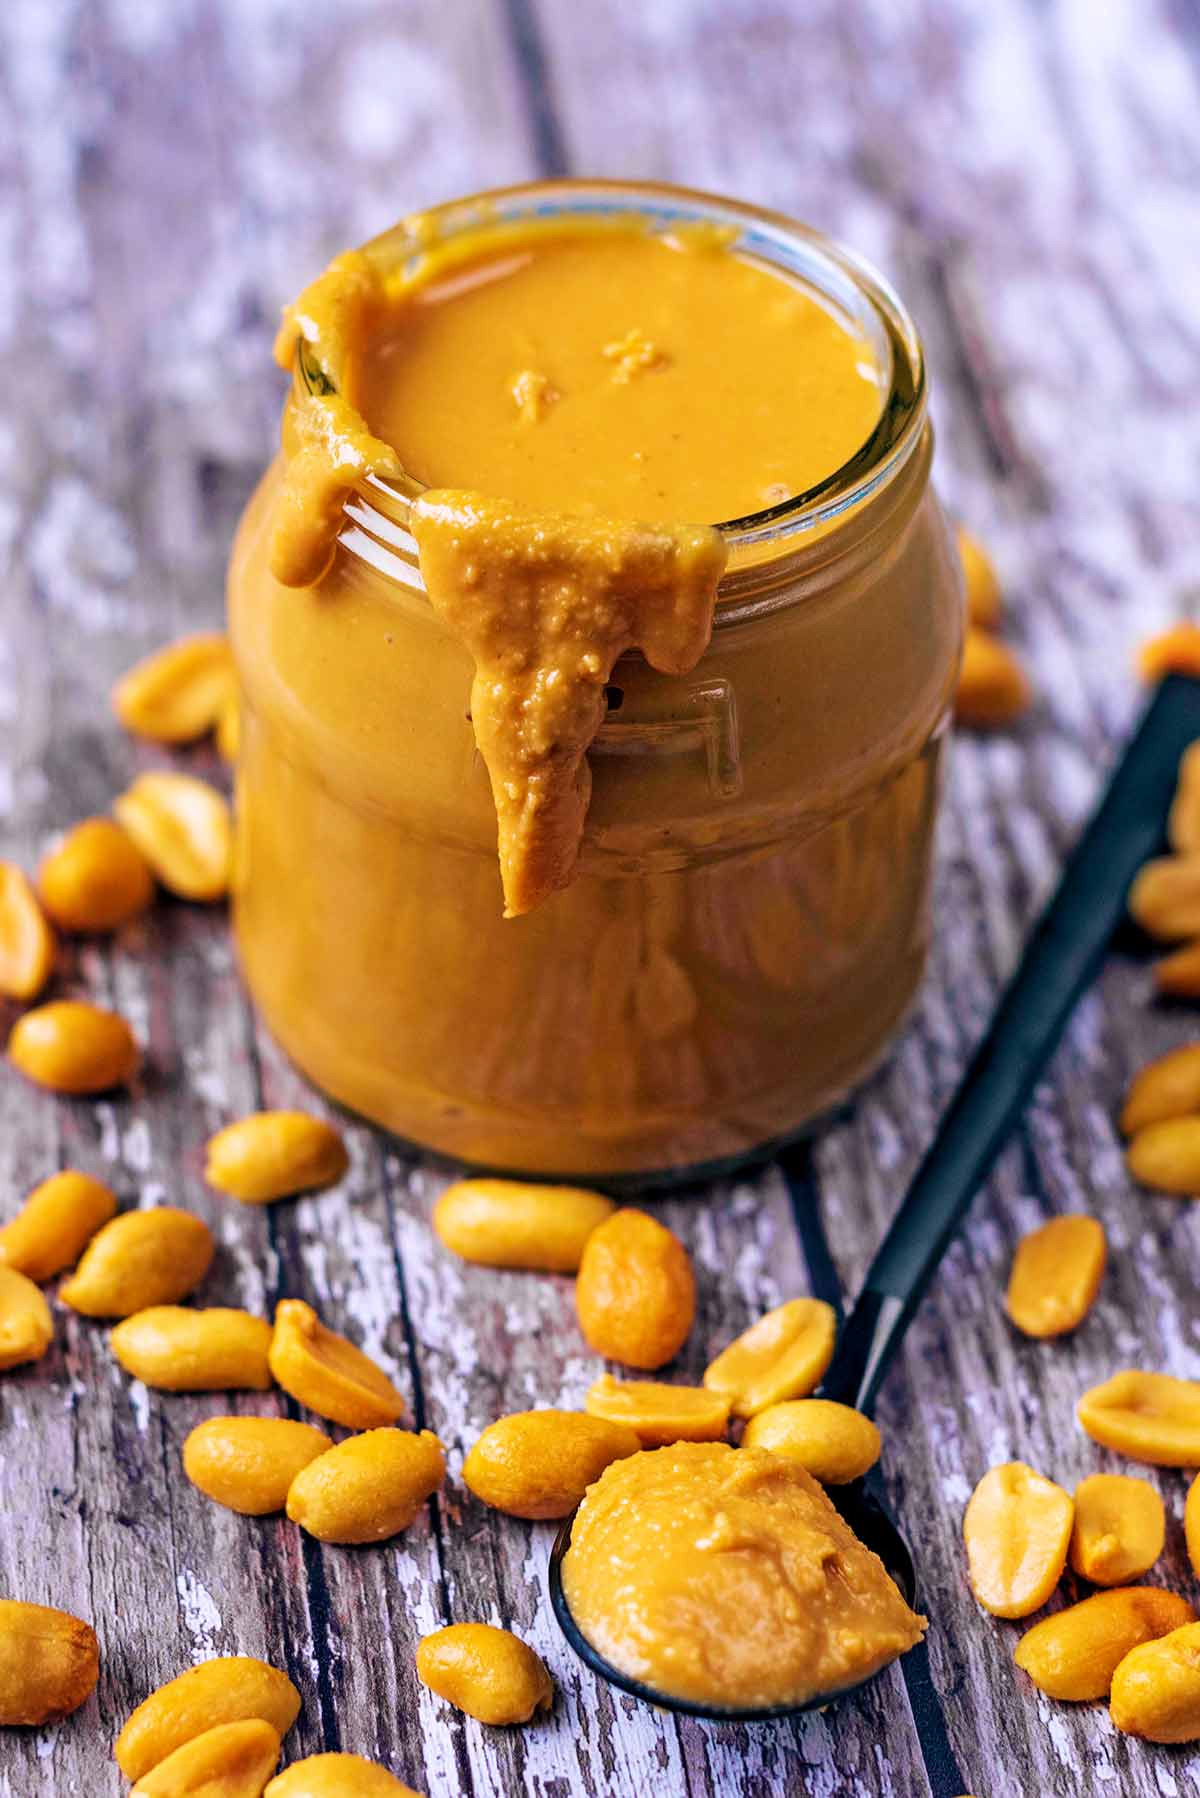 A jar of peanut butter surrounded by peanuts.